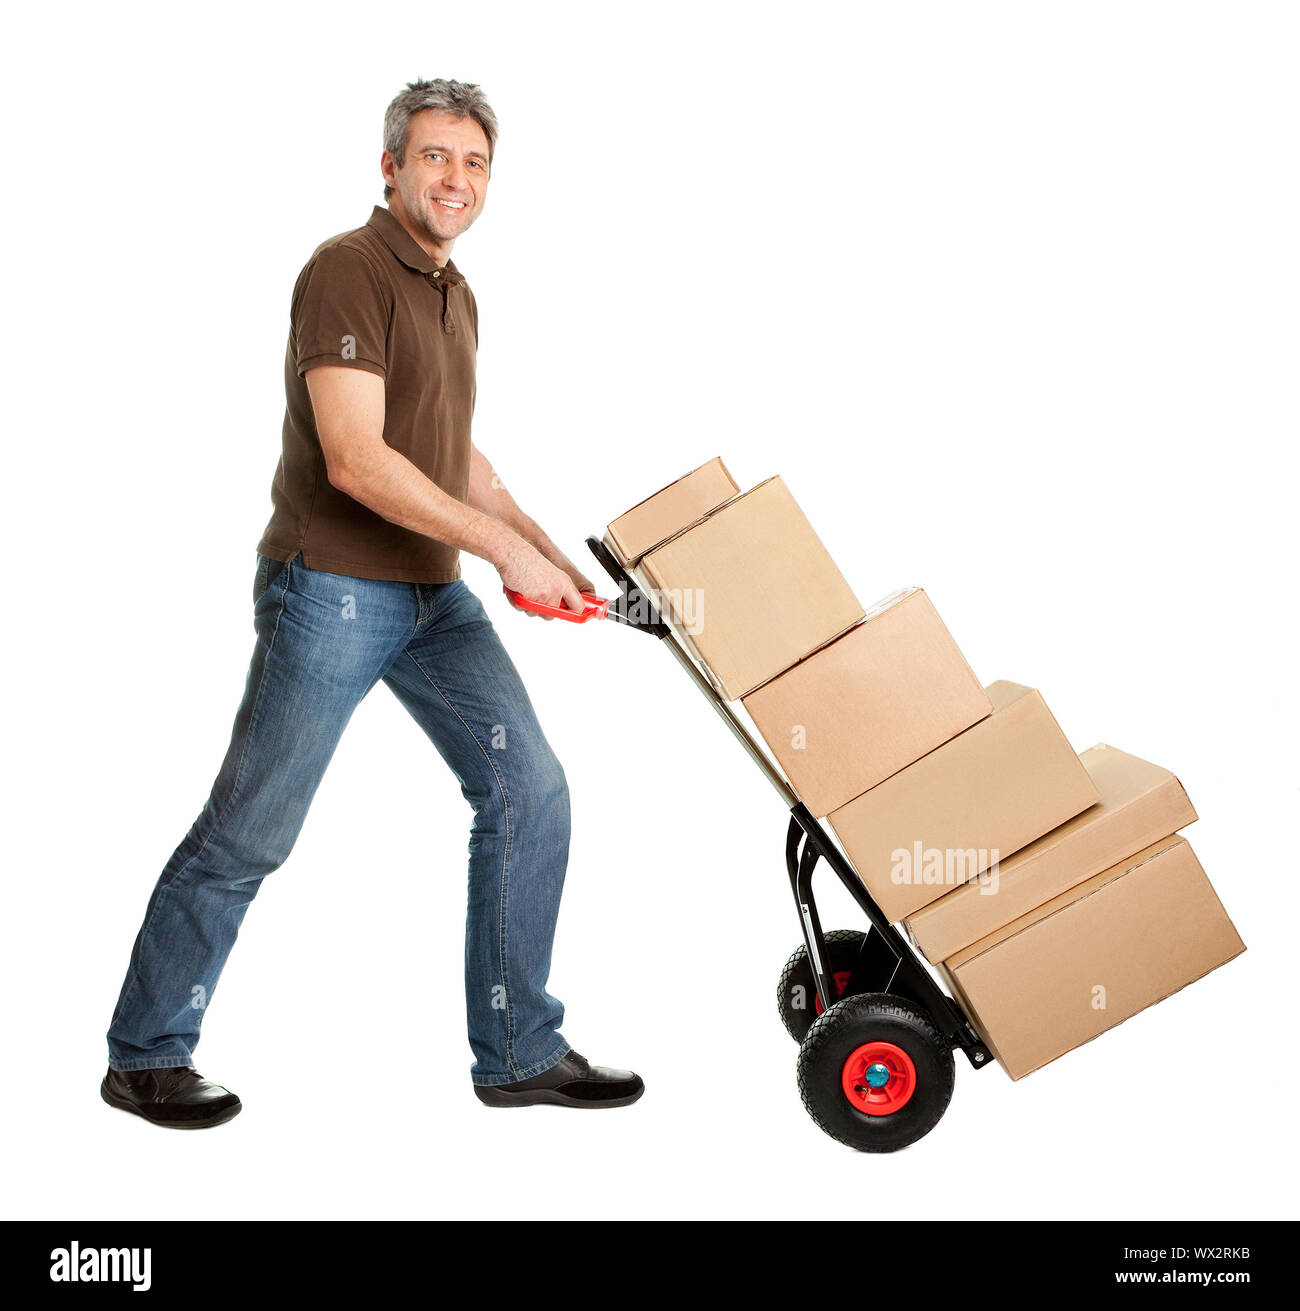 Delivery man pushing hand truck and stack of boxes Stock Photo